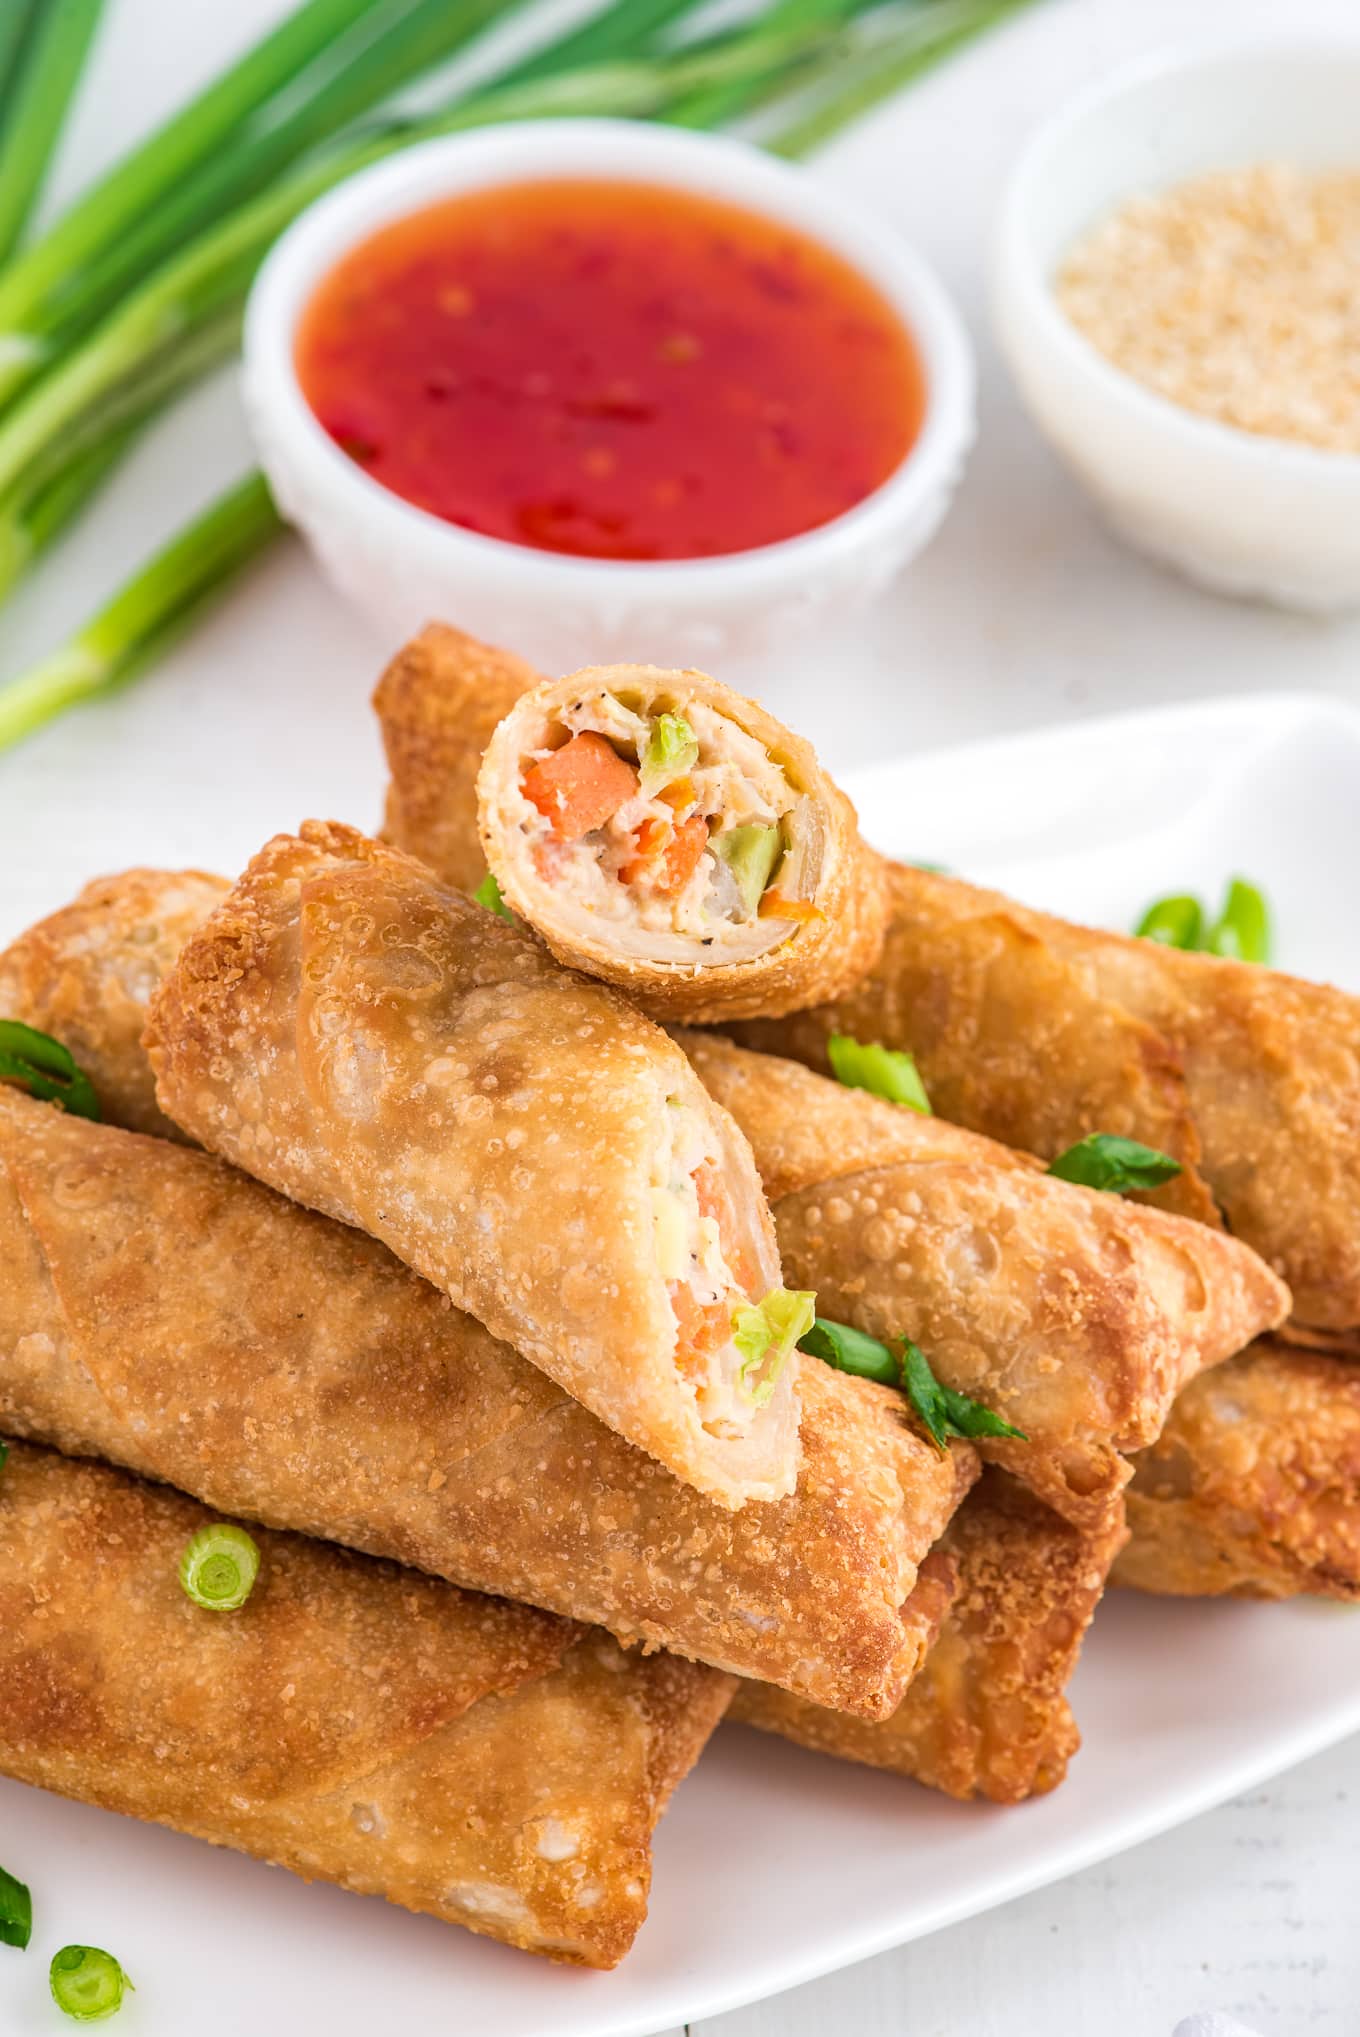 Crispy air fryer egg rolls in a stack with sweet and spicy sauce. One egg roll is cut in half to show texture. Garnished with green onion. 